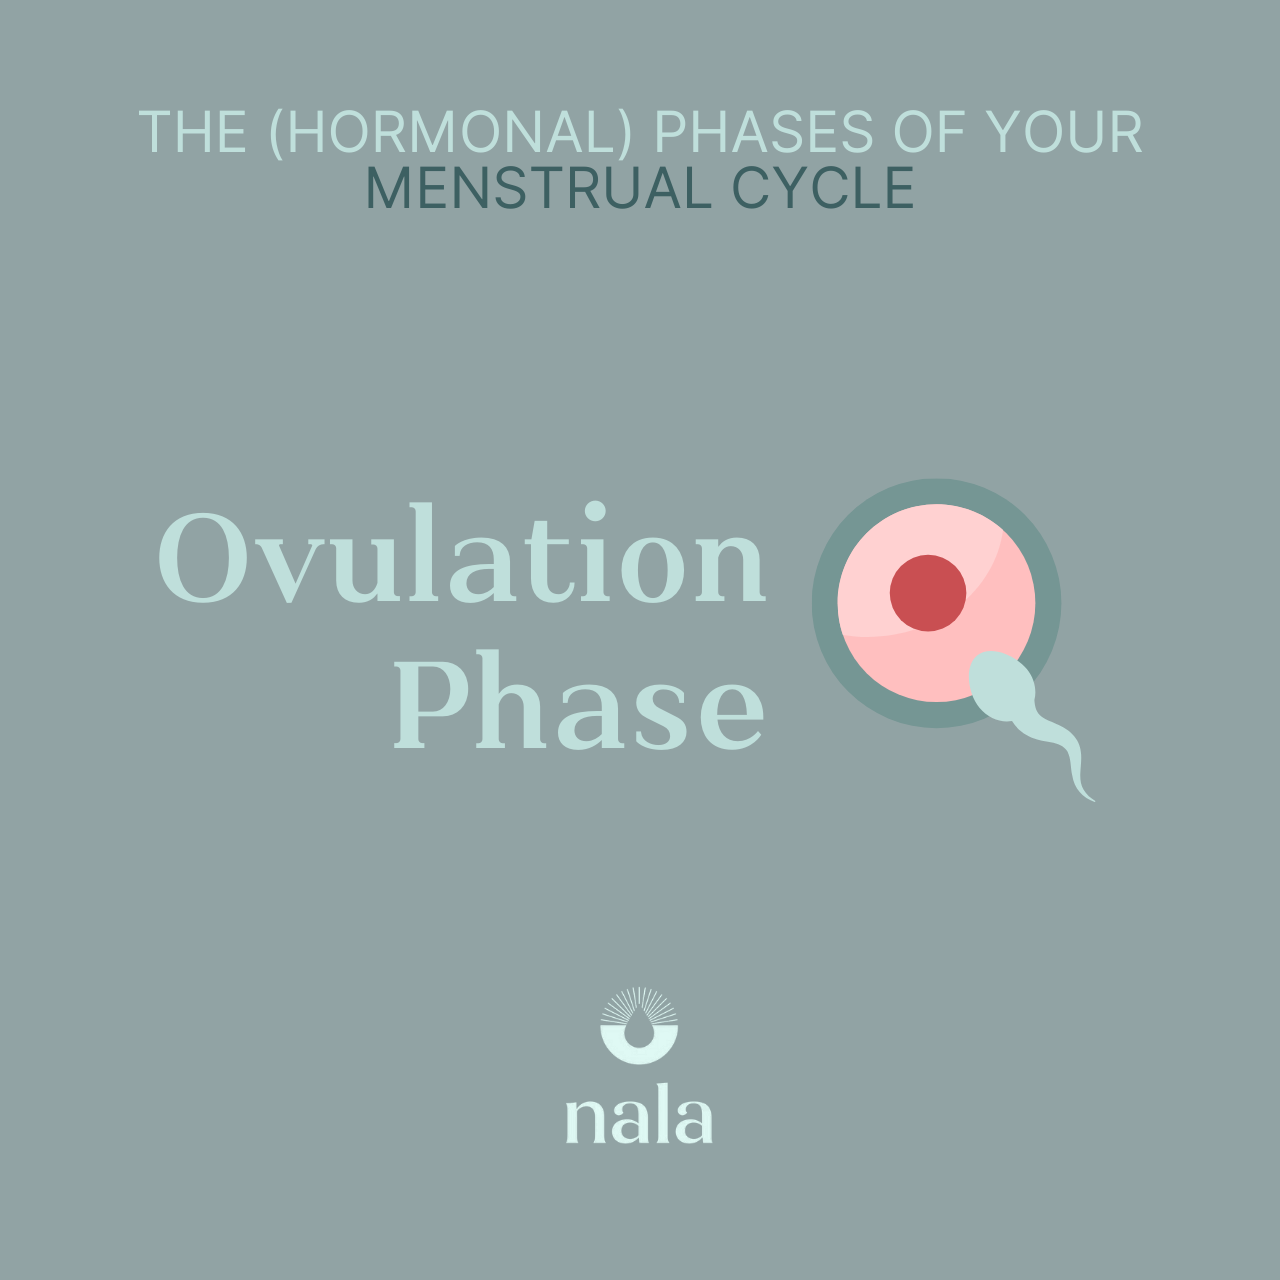 The (Hormonal) Phases of Your Menstrual Cycle: Ovulation Phase